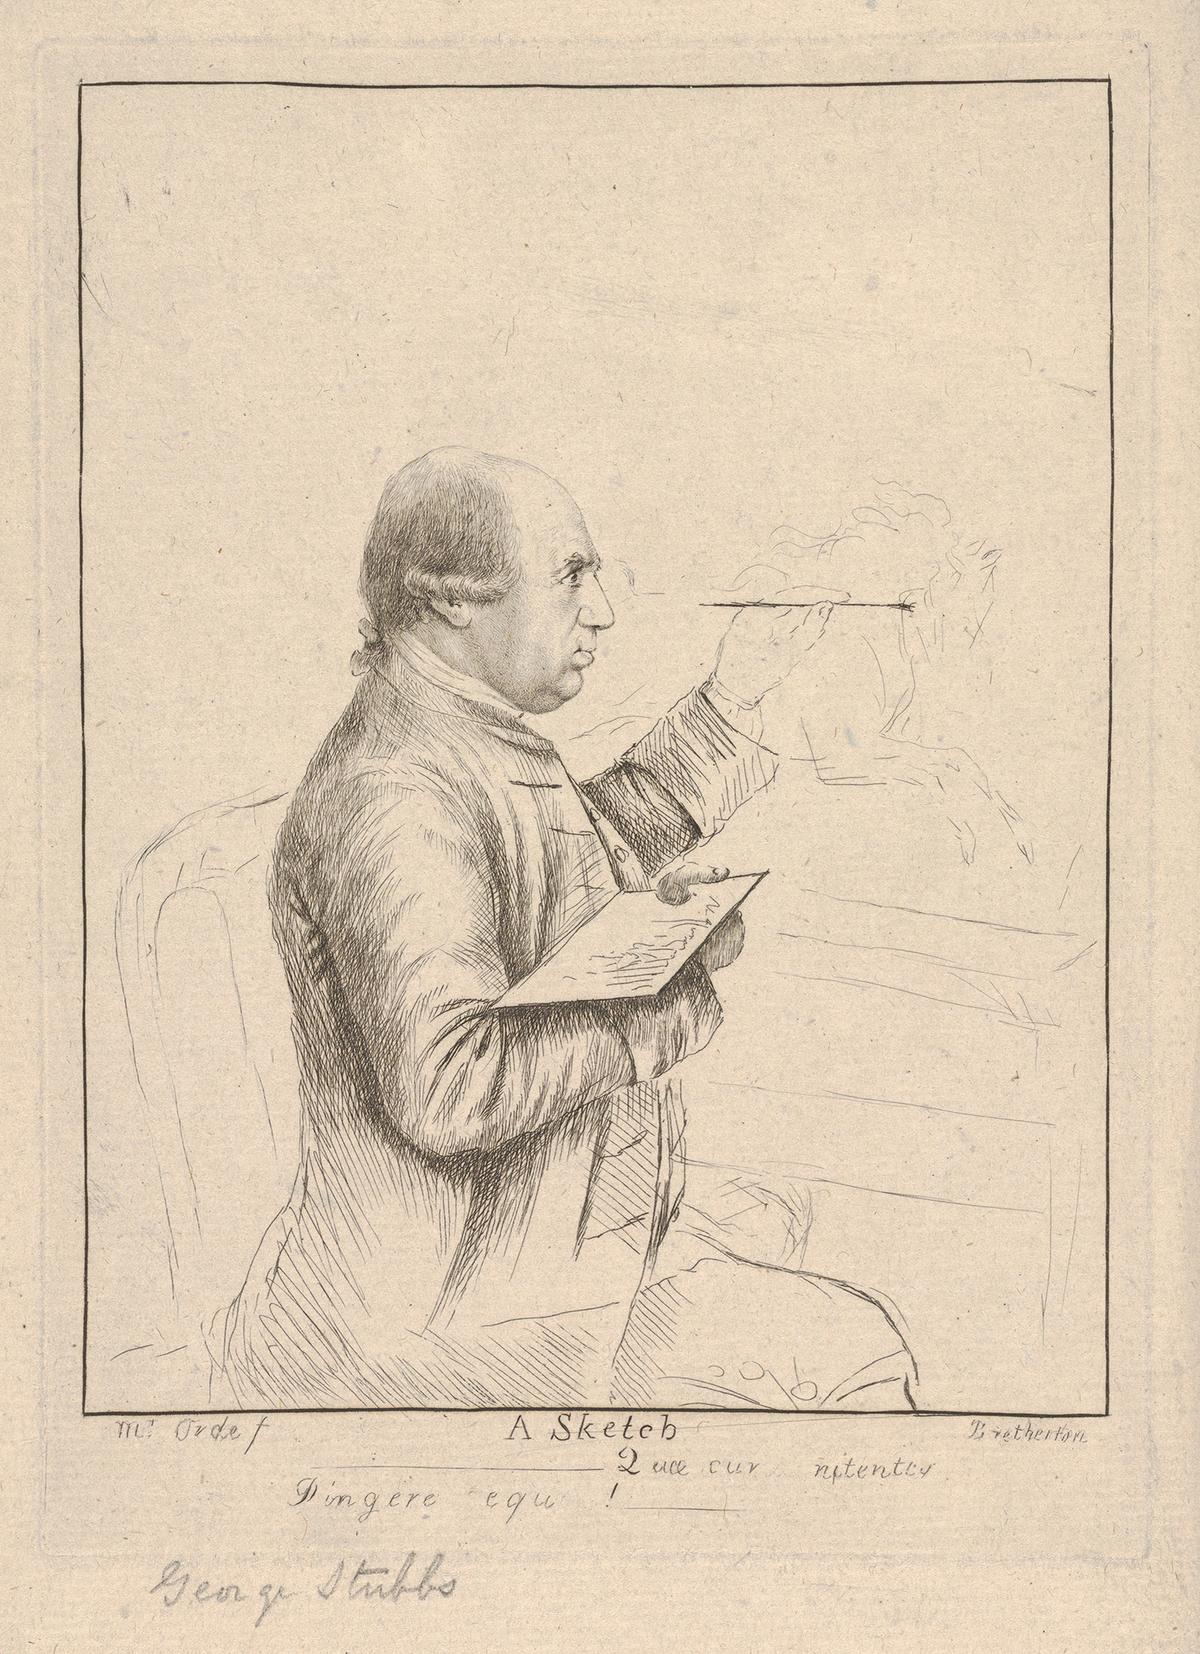  "A Sketch (Portrait of George Stubbs)," second half of the 18th century, by James Bretherton. Etching. The Metropolitan Museum of Art, New York. (Public Domain)